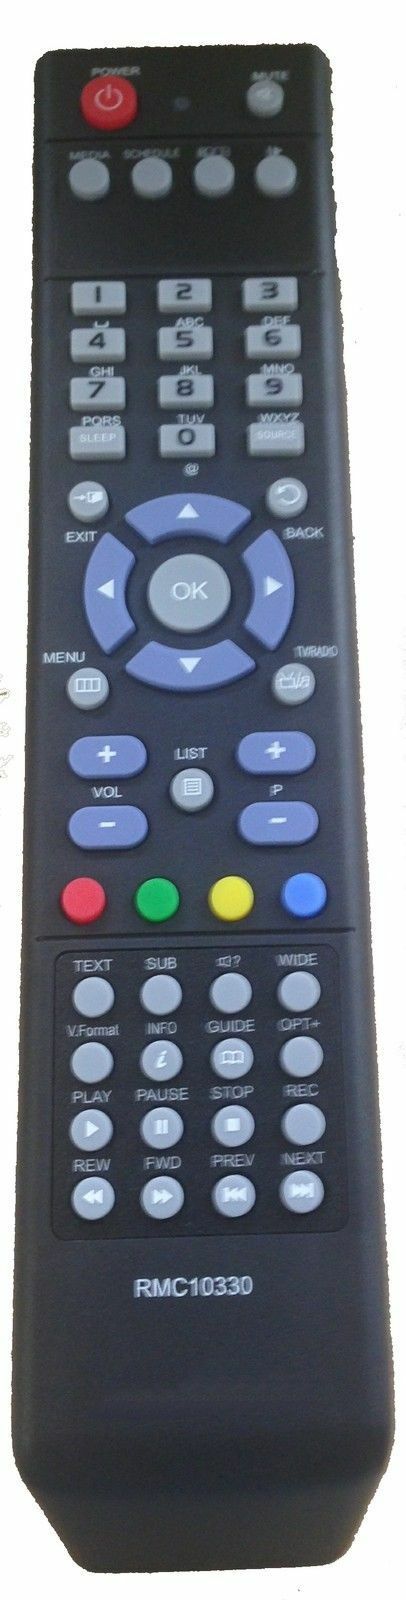 Replacement Remote Control for Miraclebox 6, 7, 8 and 9